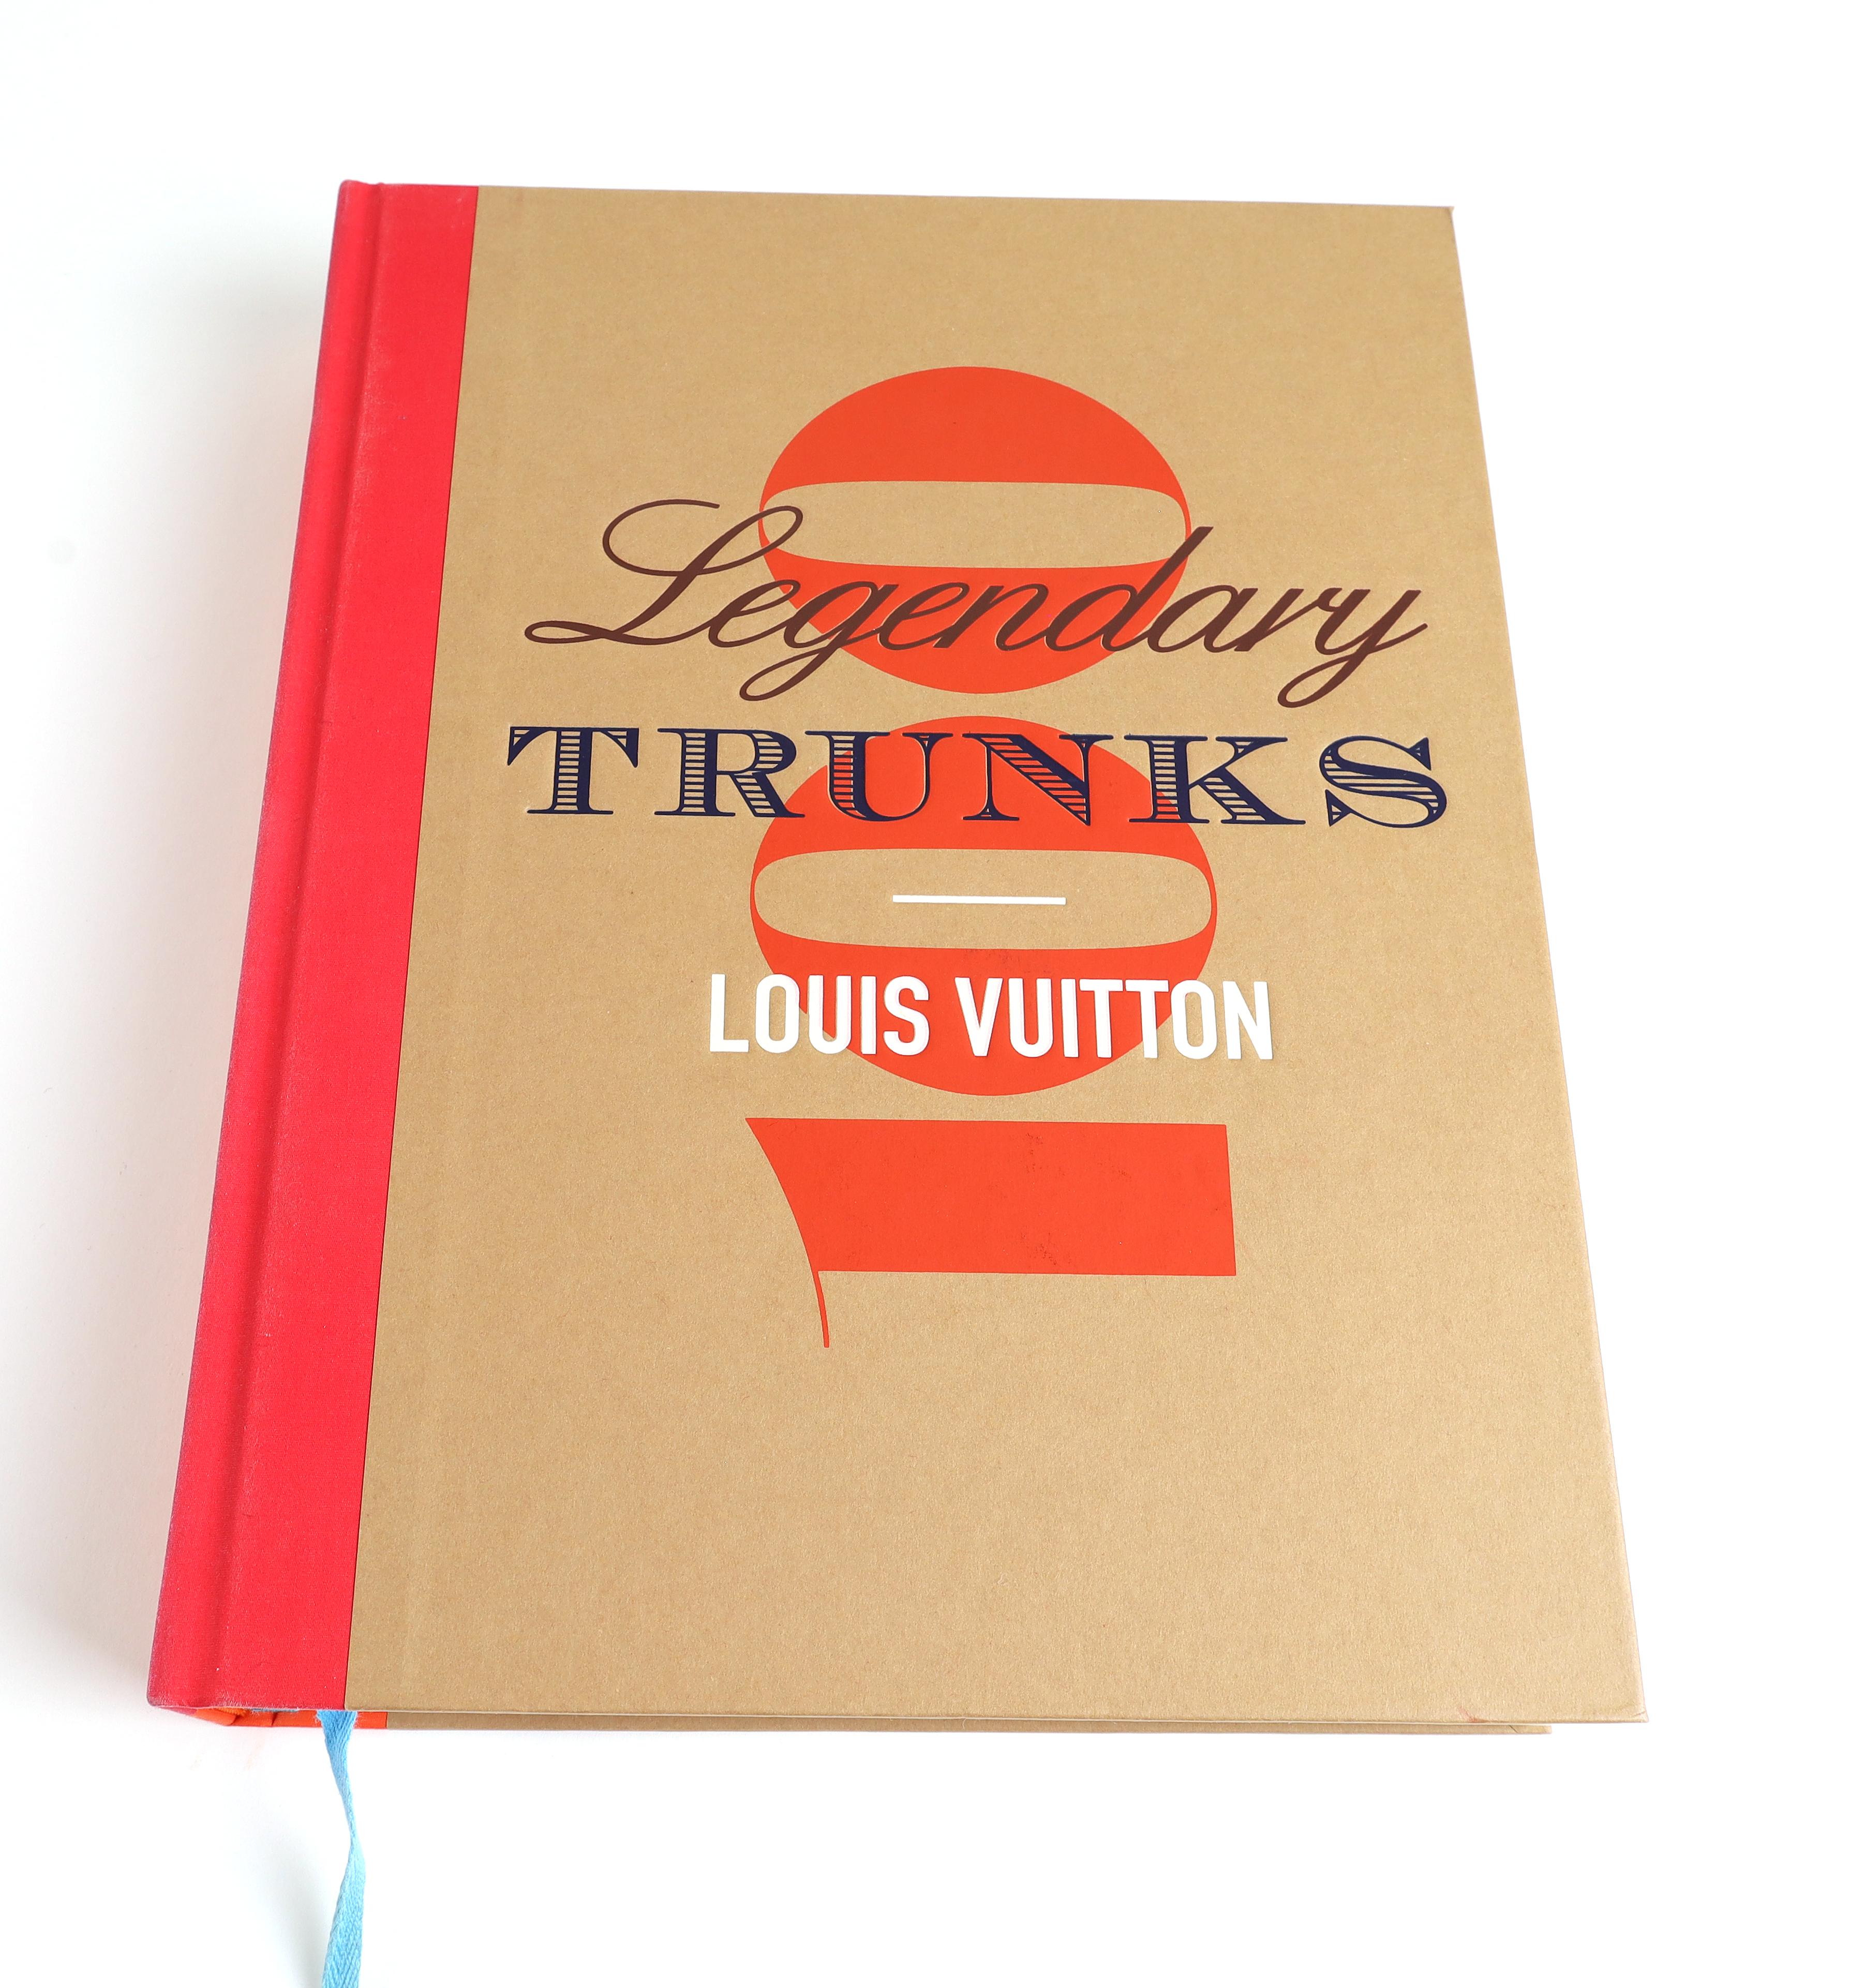 The Story Behind Louis Vuitton's Legendary Trunks